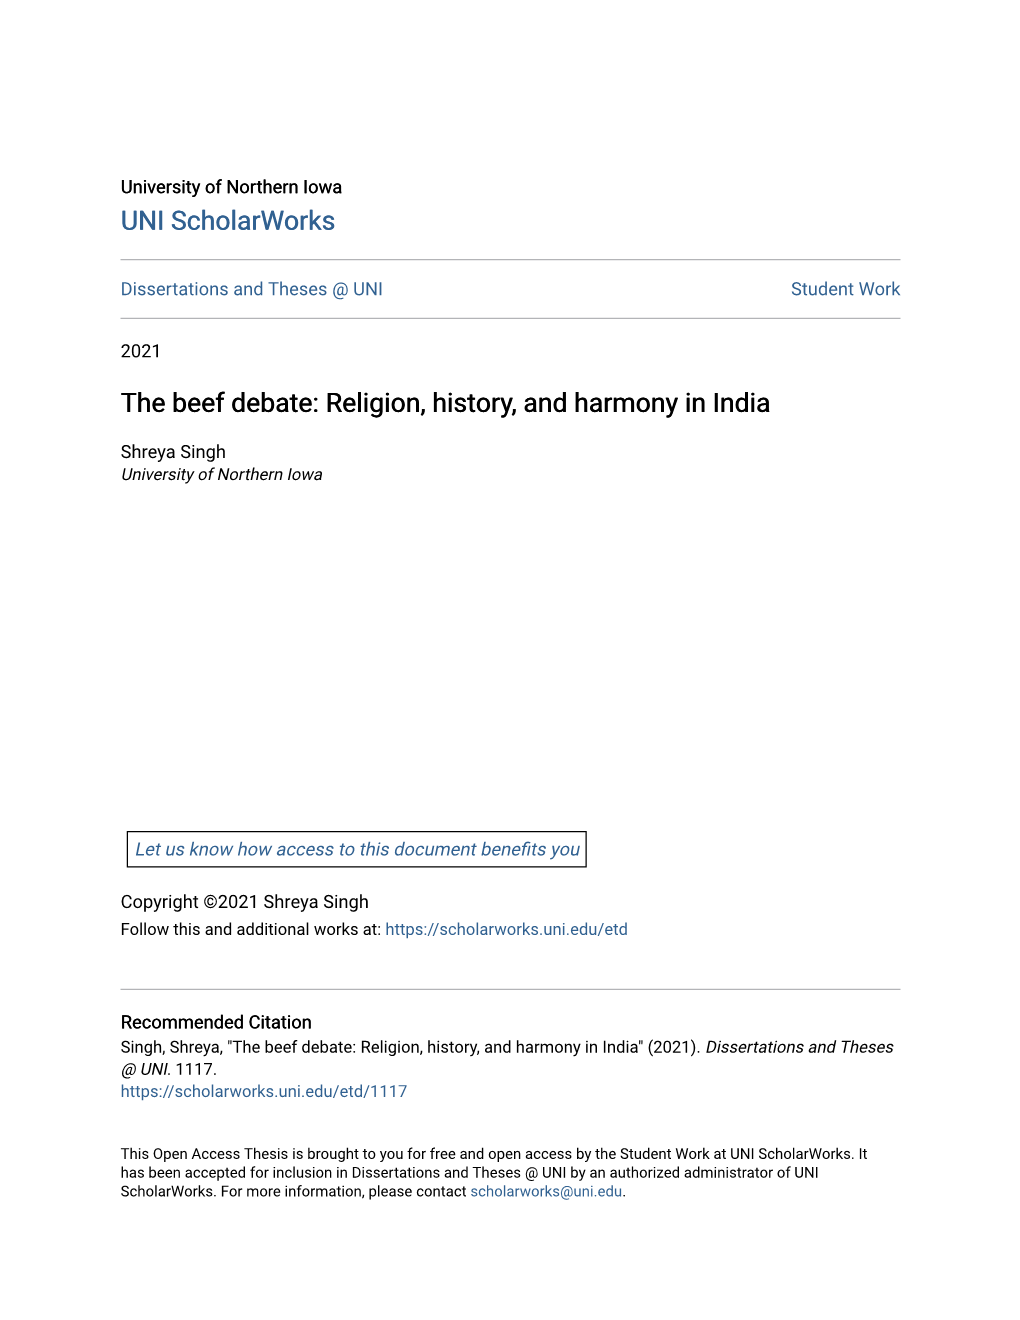 The Beef Debate: Religion, History, and Harmony in India